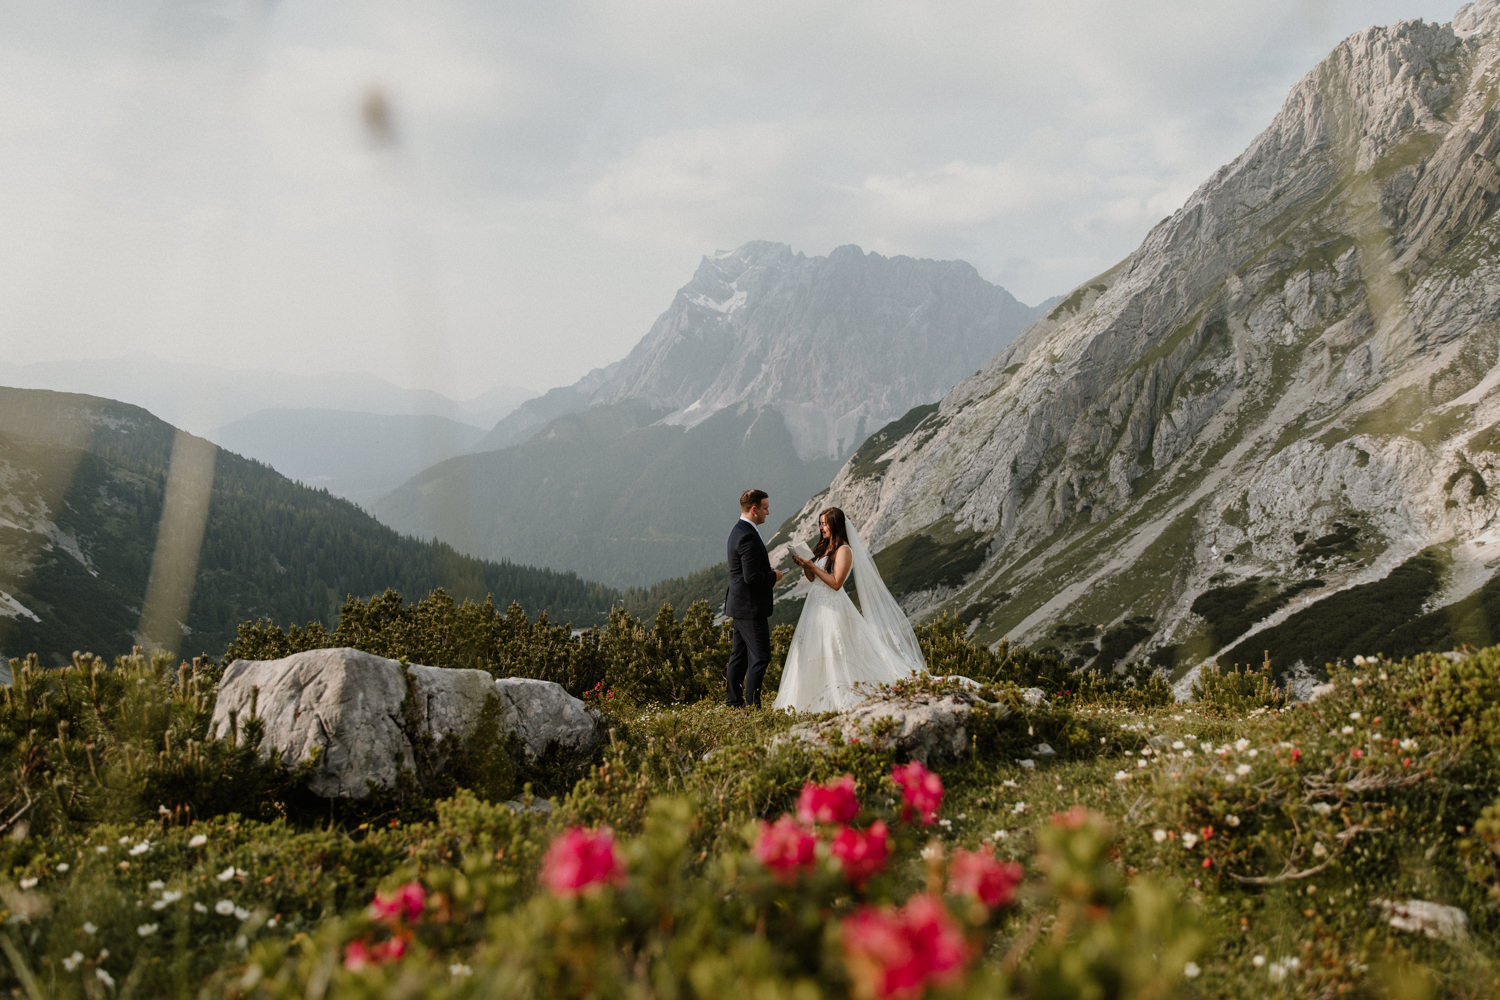 A couple hiking on their elopement day stand under the Austrian Zugspitze, framed by pink wildflowers, reading their wedding vows